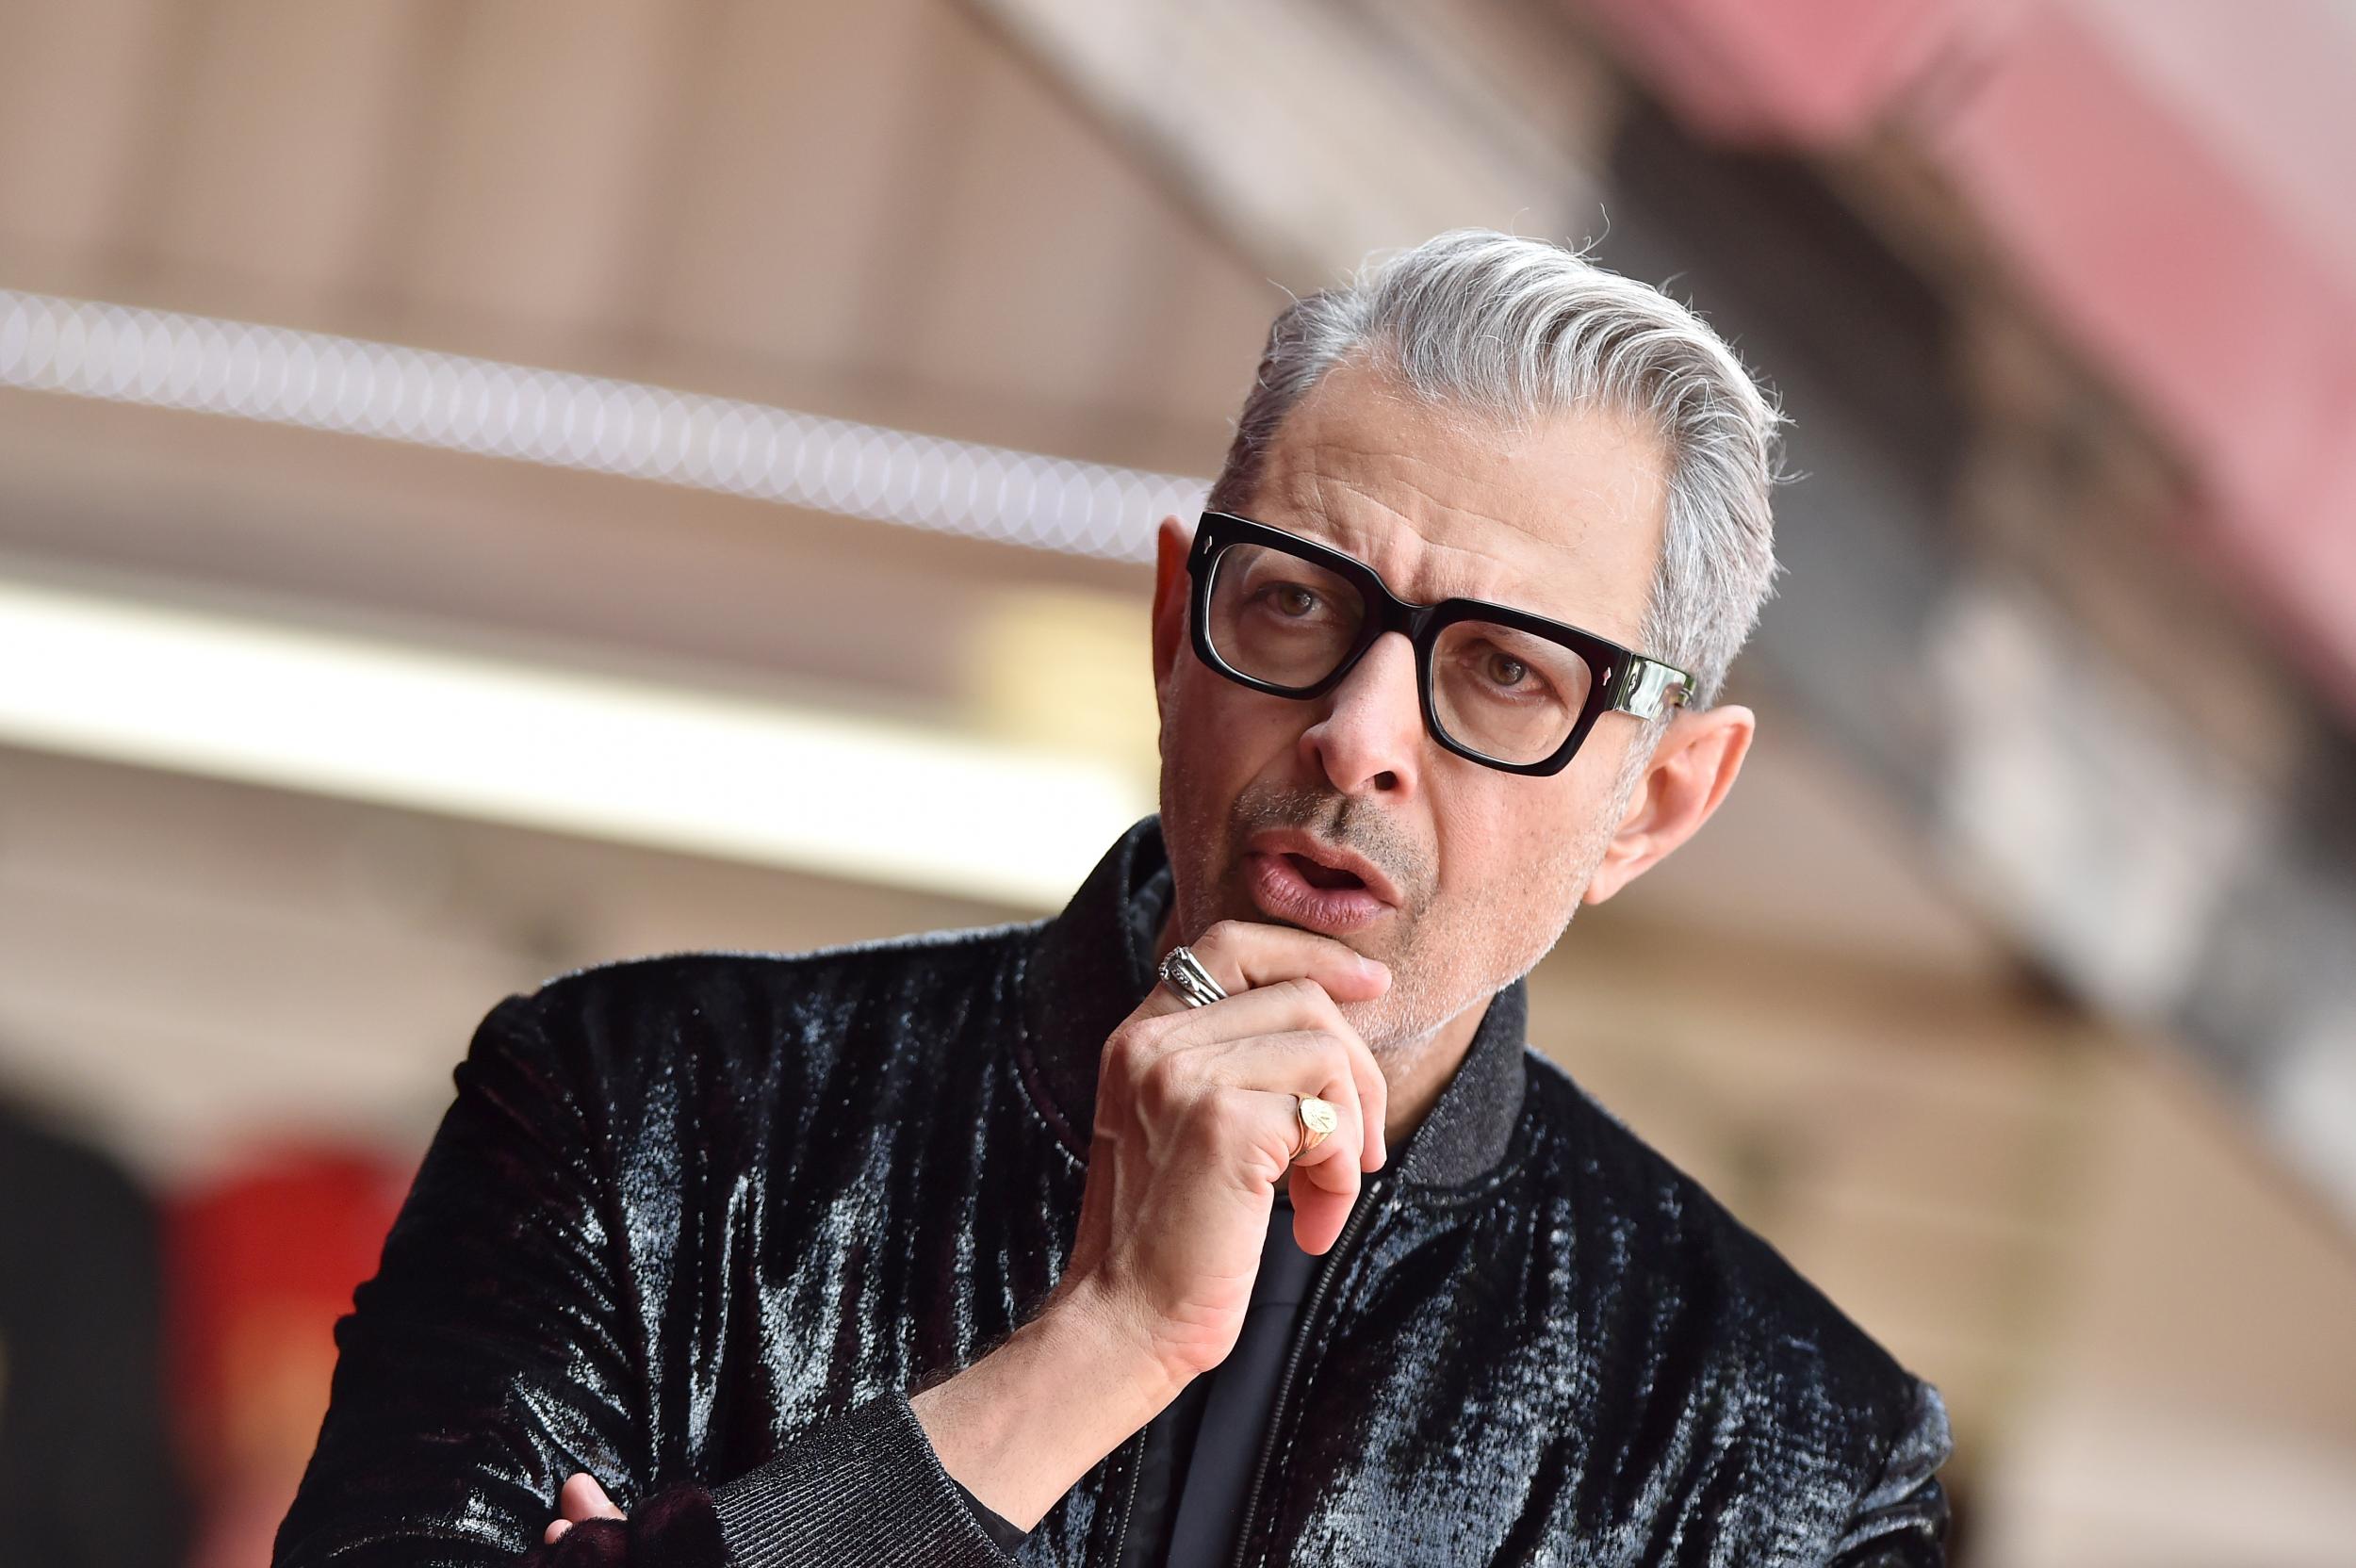 Actor Jeff Goldblum is honored with star on the Hollywood Walk of Fame on June 14, 2018 in Hollywood, California